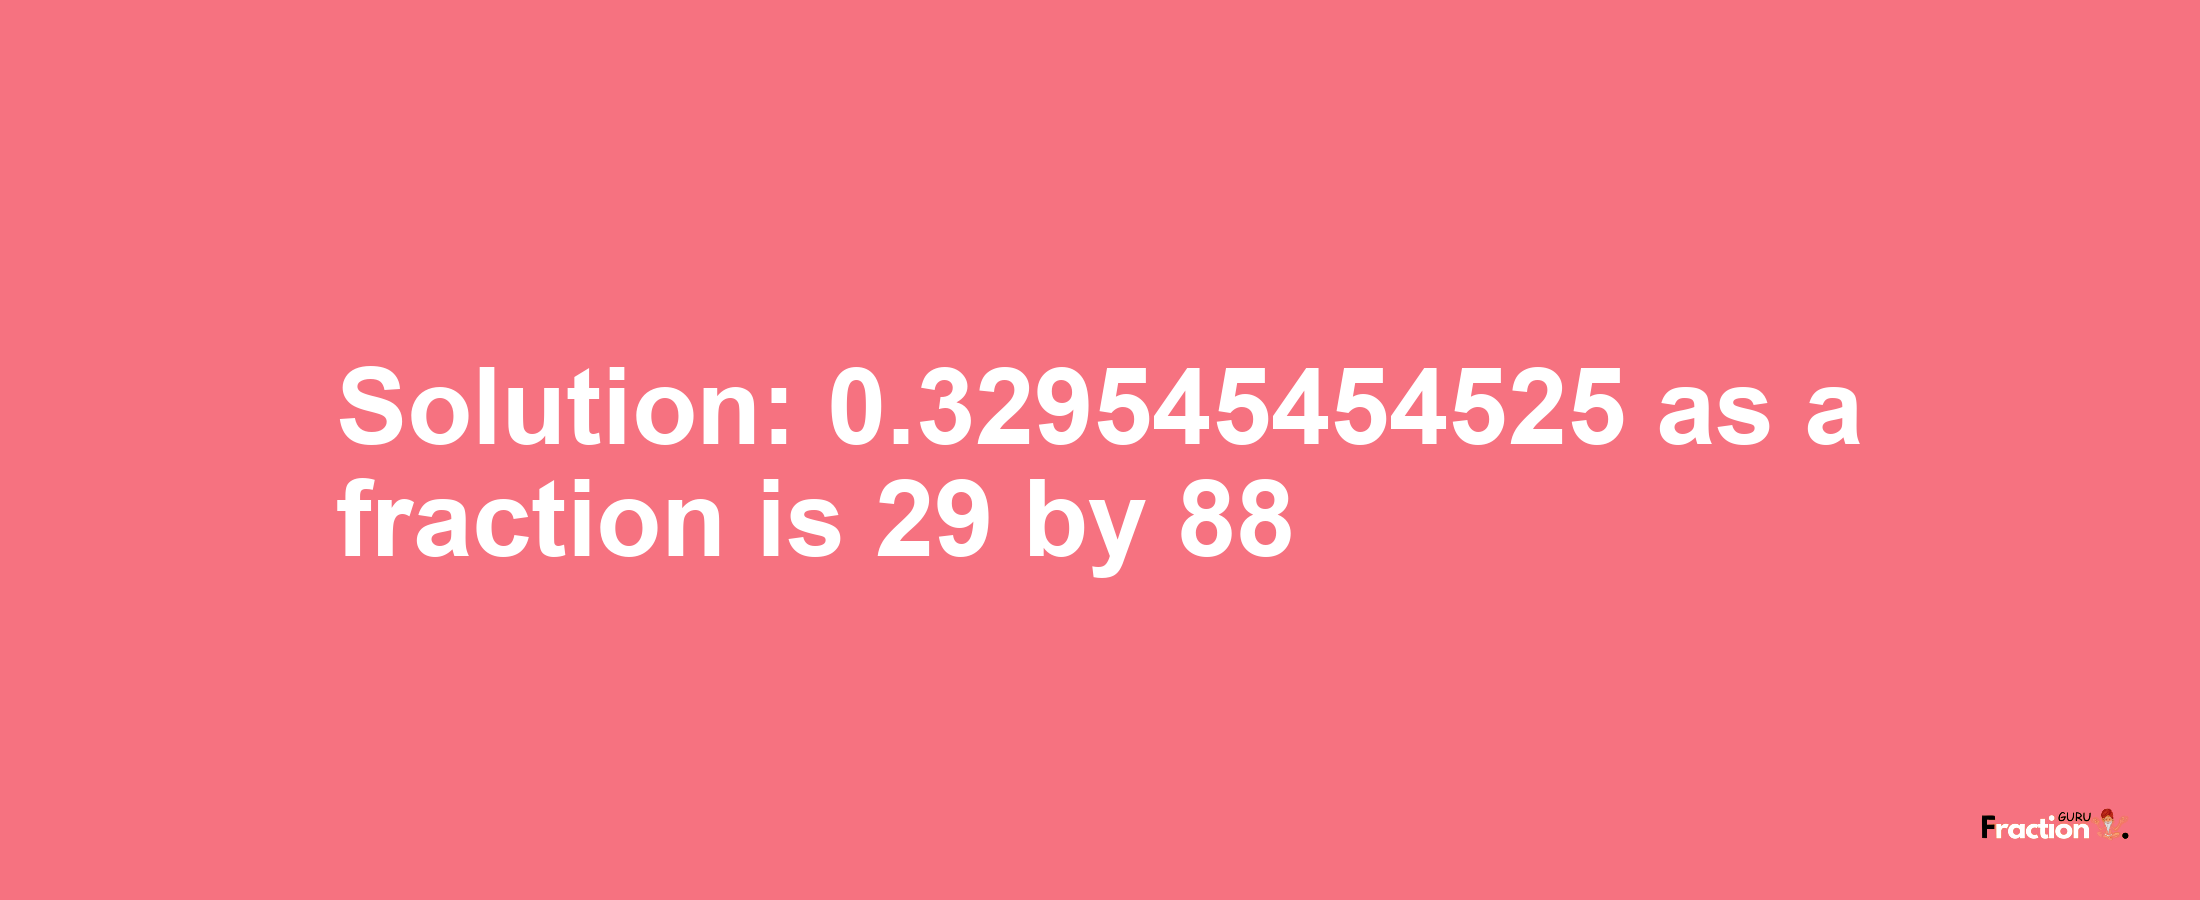 Solution:0.329545454525 as a fraction is 29/88